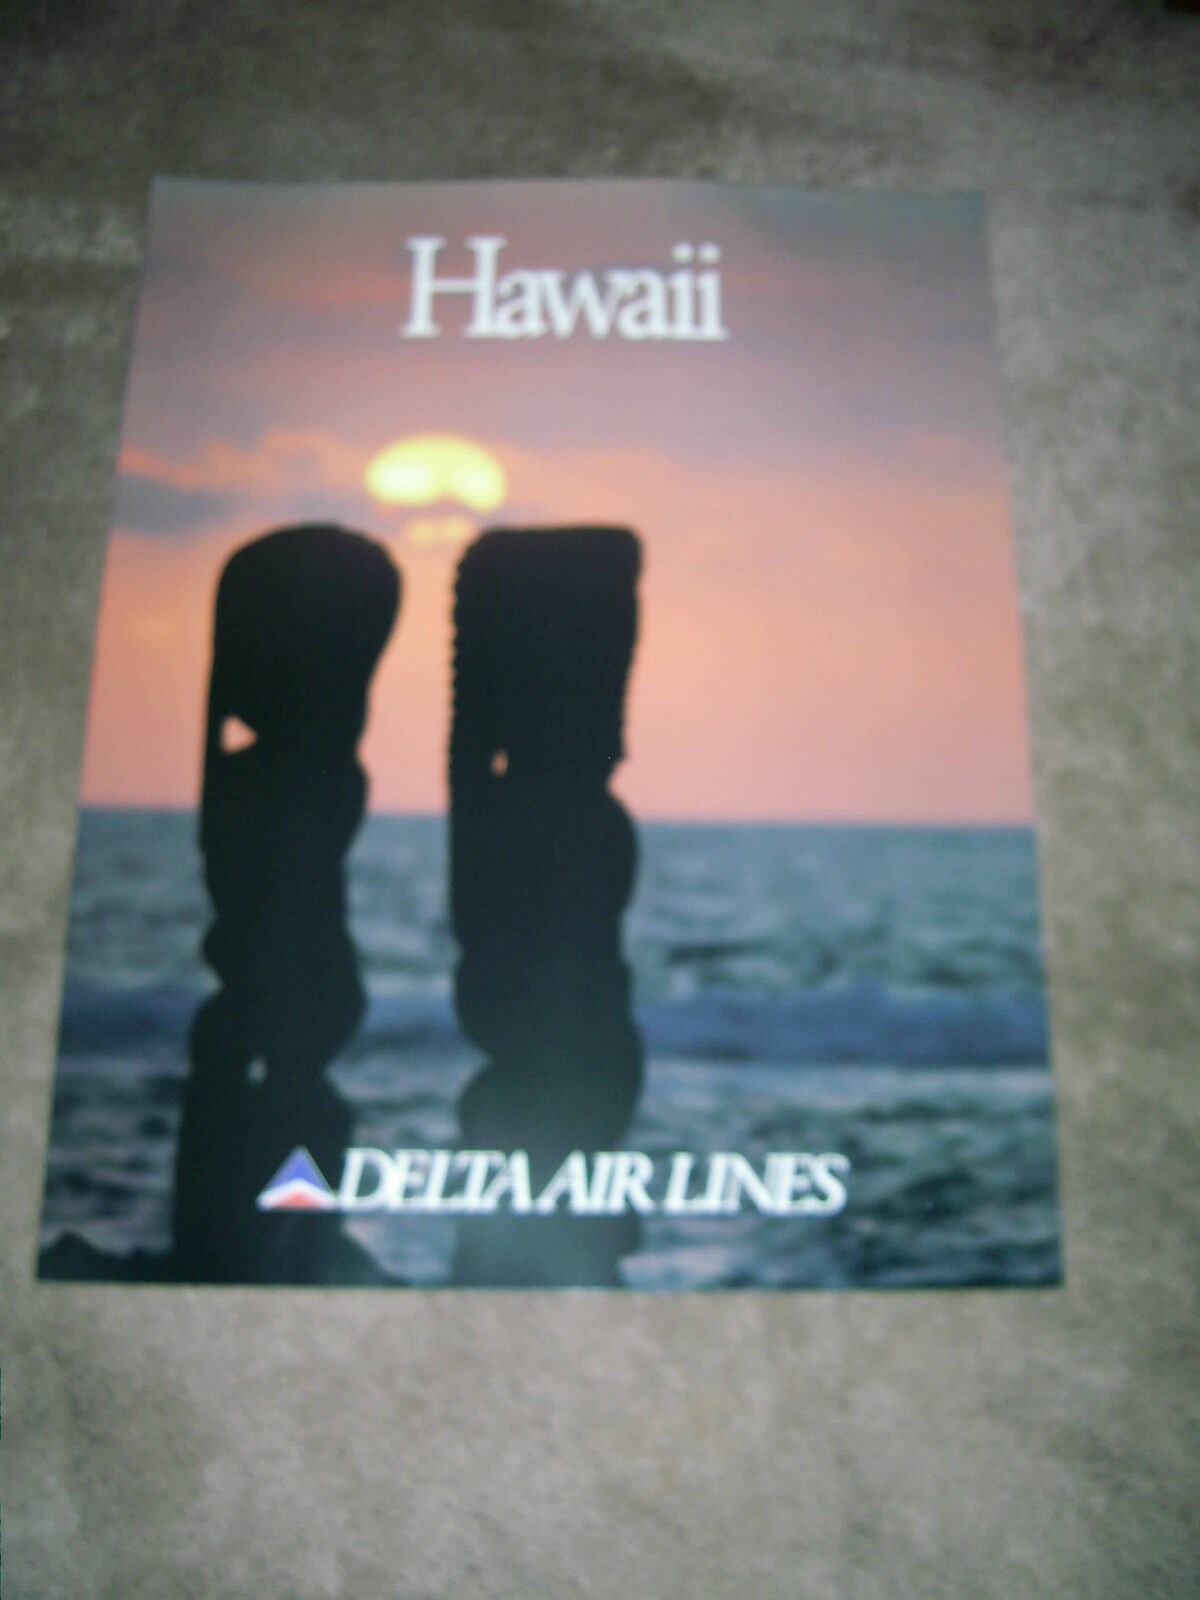  DELTA AIR LINES - HAWAII - LARGE POSTER 28 x 22     